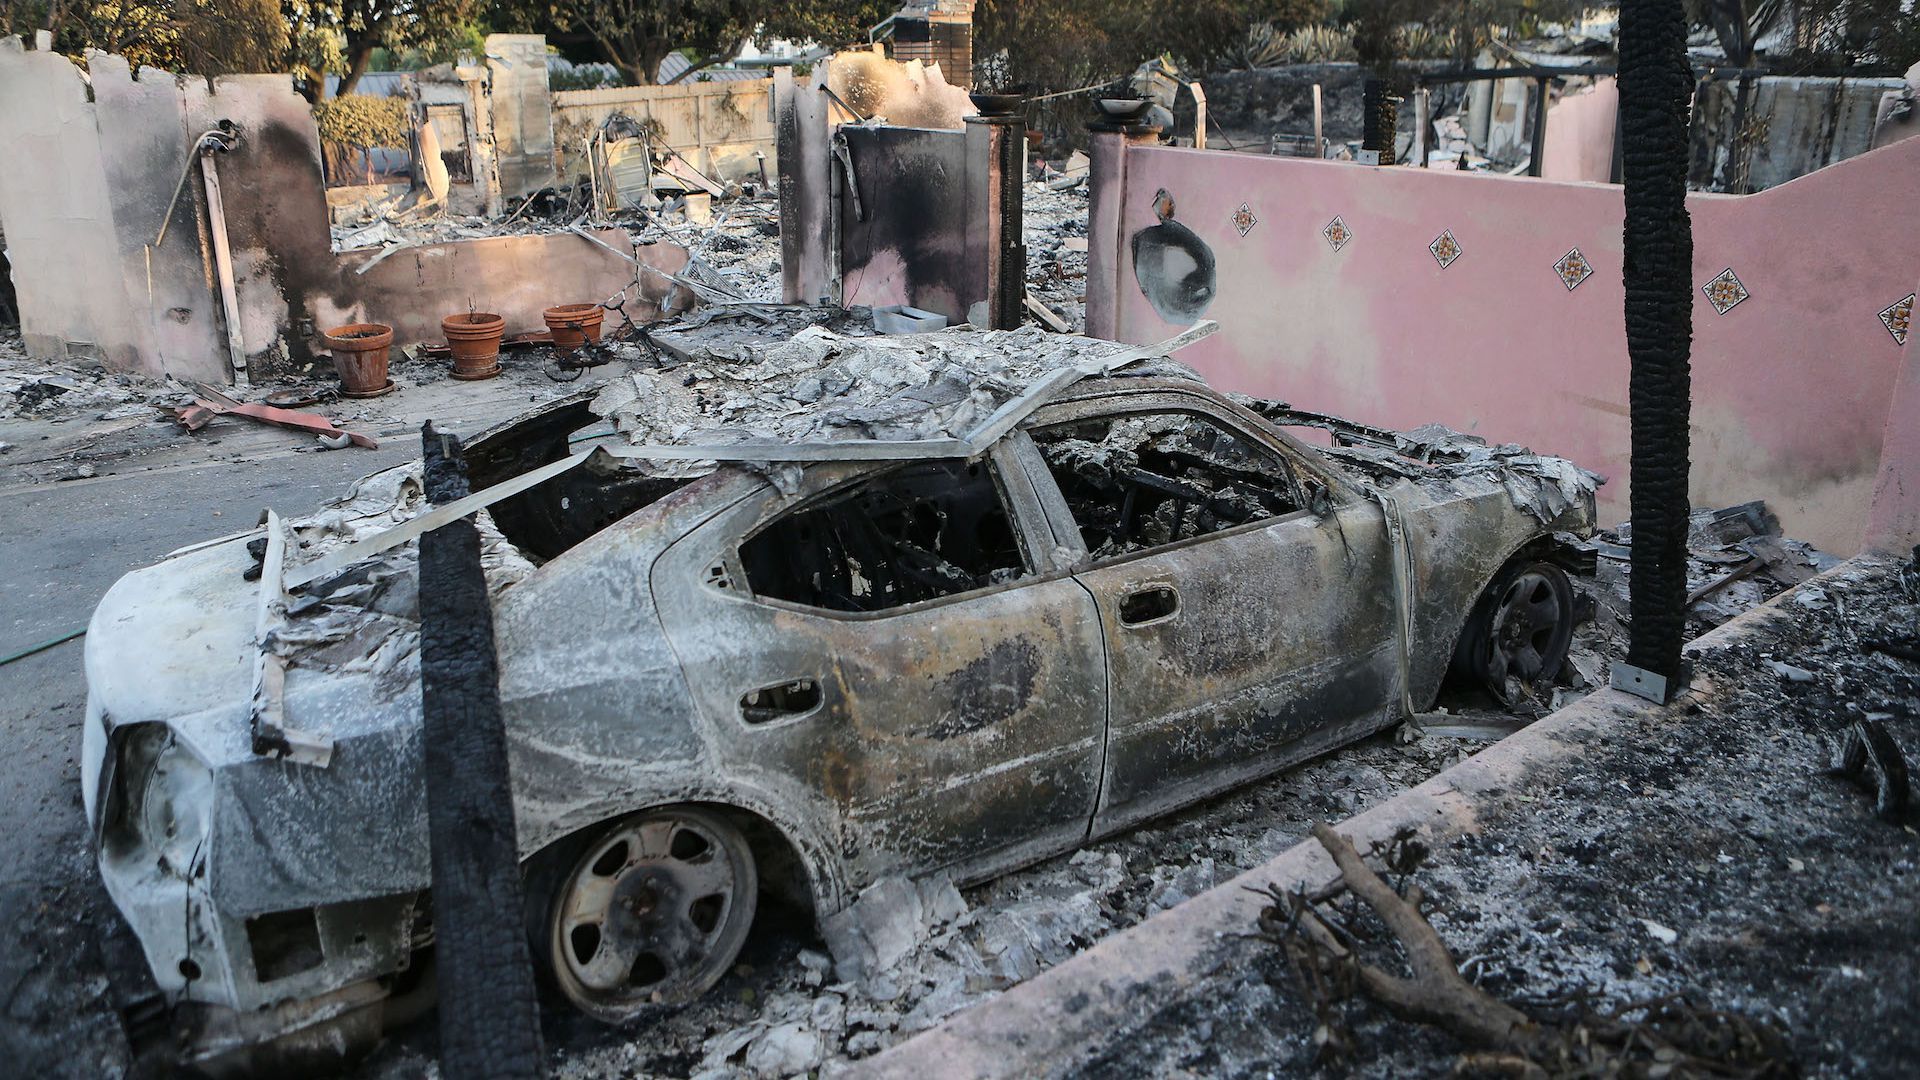 The remains of a destroyed car stand in front of a destroyed home in the aftermath of the Holiday Fire on July 7, 2018 in Goleta, California.